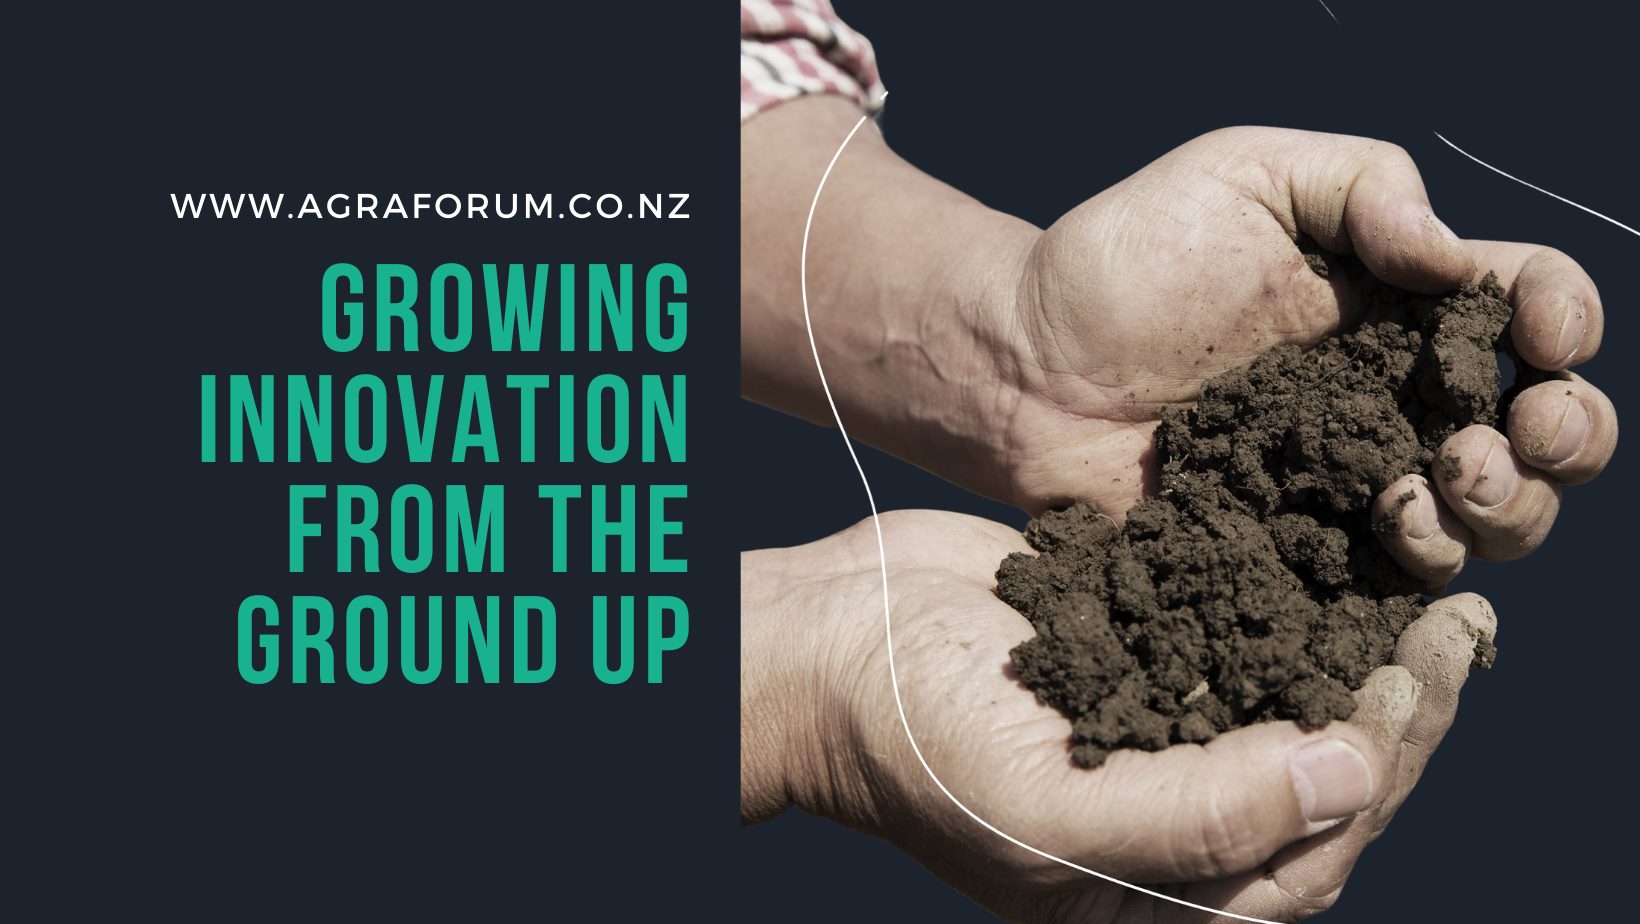 Ashburton-based Agraforum: Unveiling Agricultural Excellence For the First Time at the Waimumu, Gore, Southern Field Days – One of NZs Largest Agricultural Events